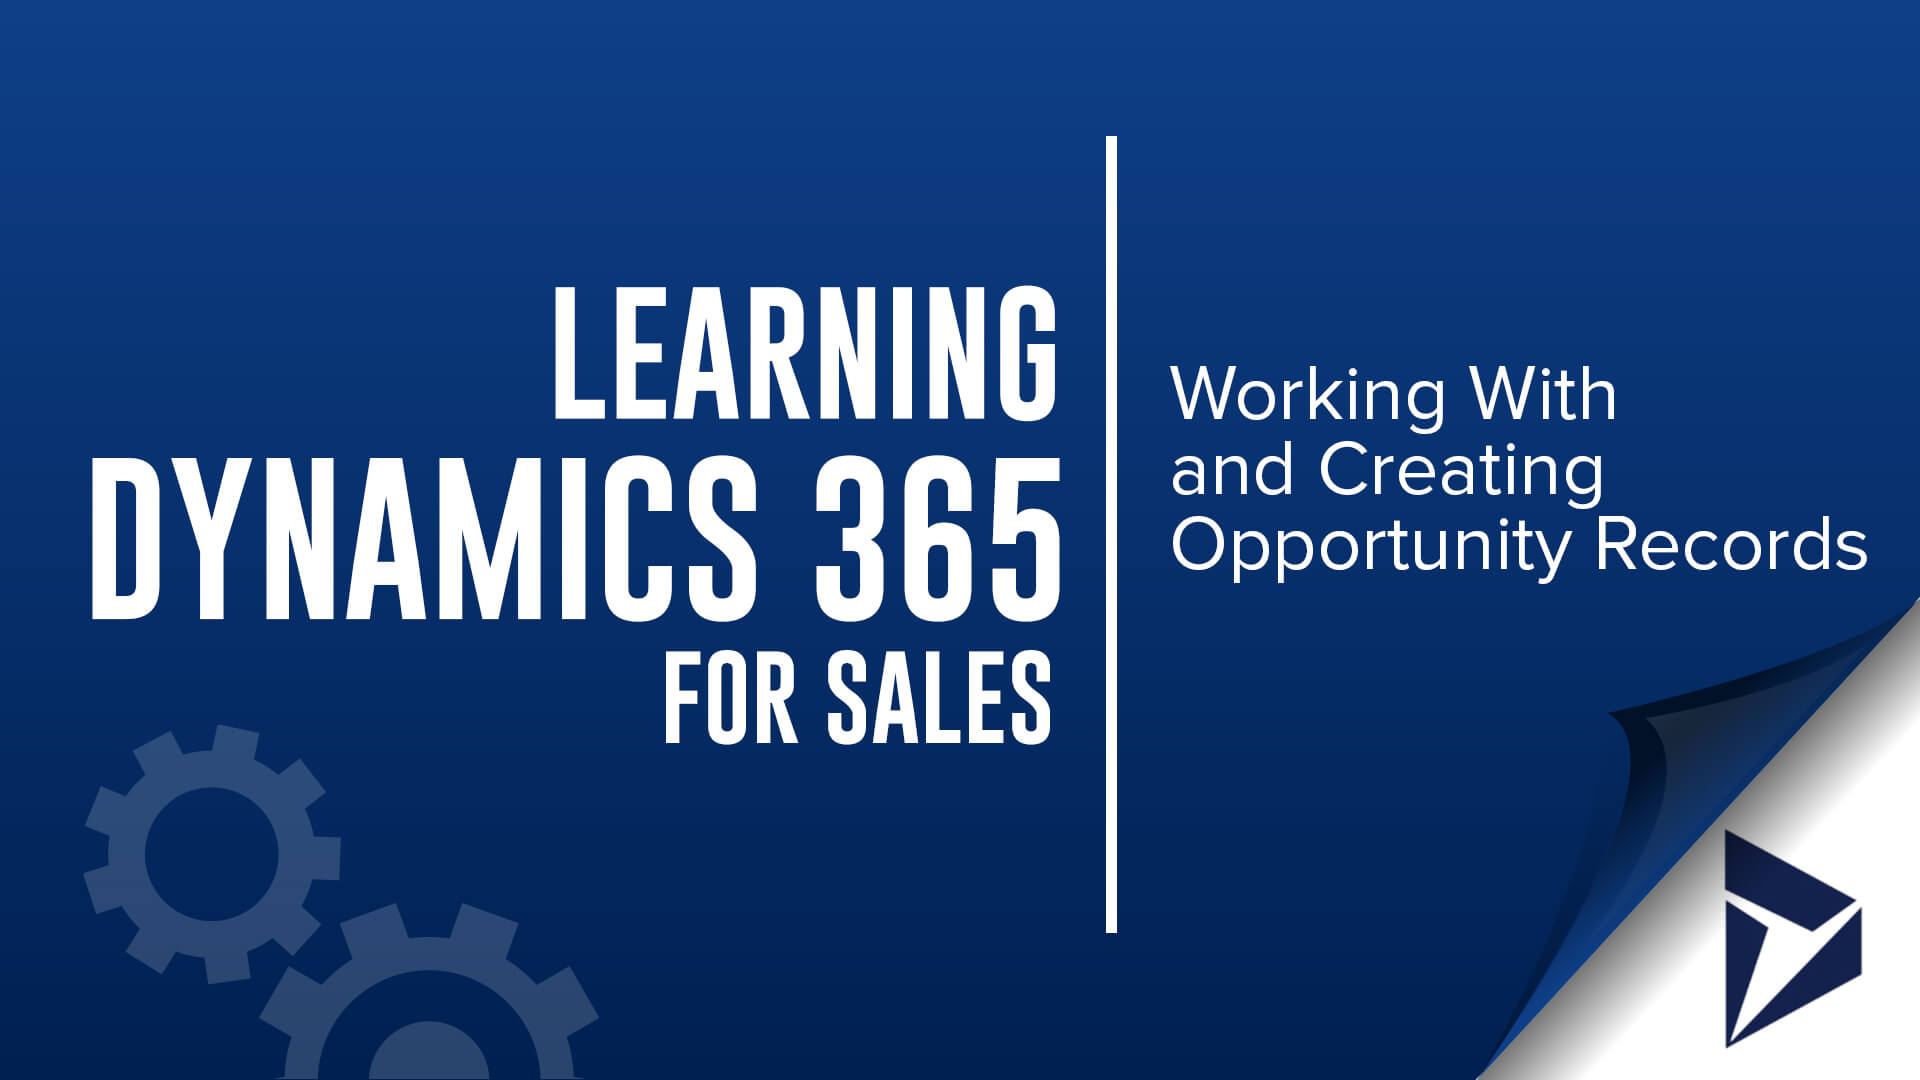 learning Dynamics 365 for Sales - Working with and Creating Opportunity Records